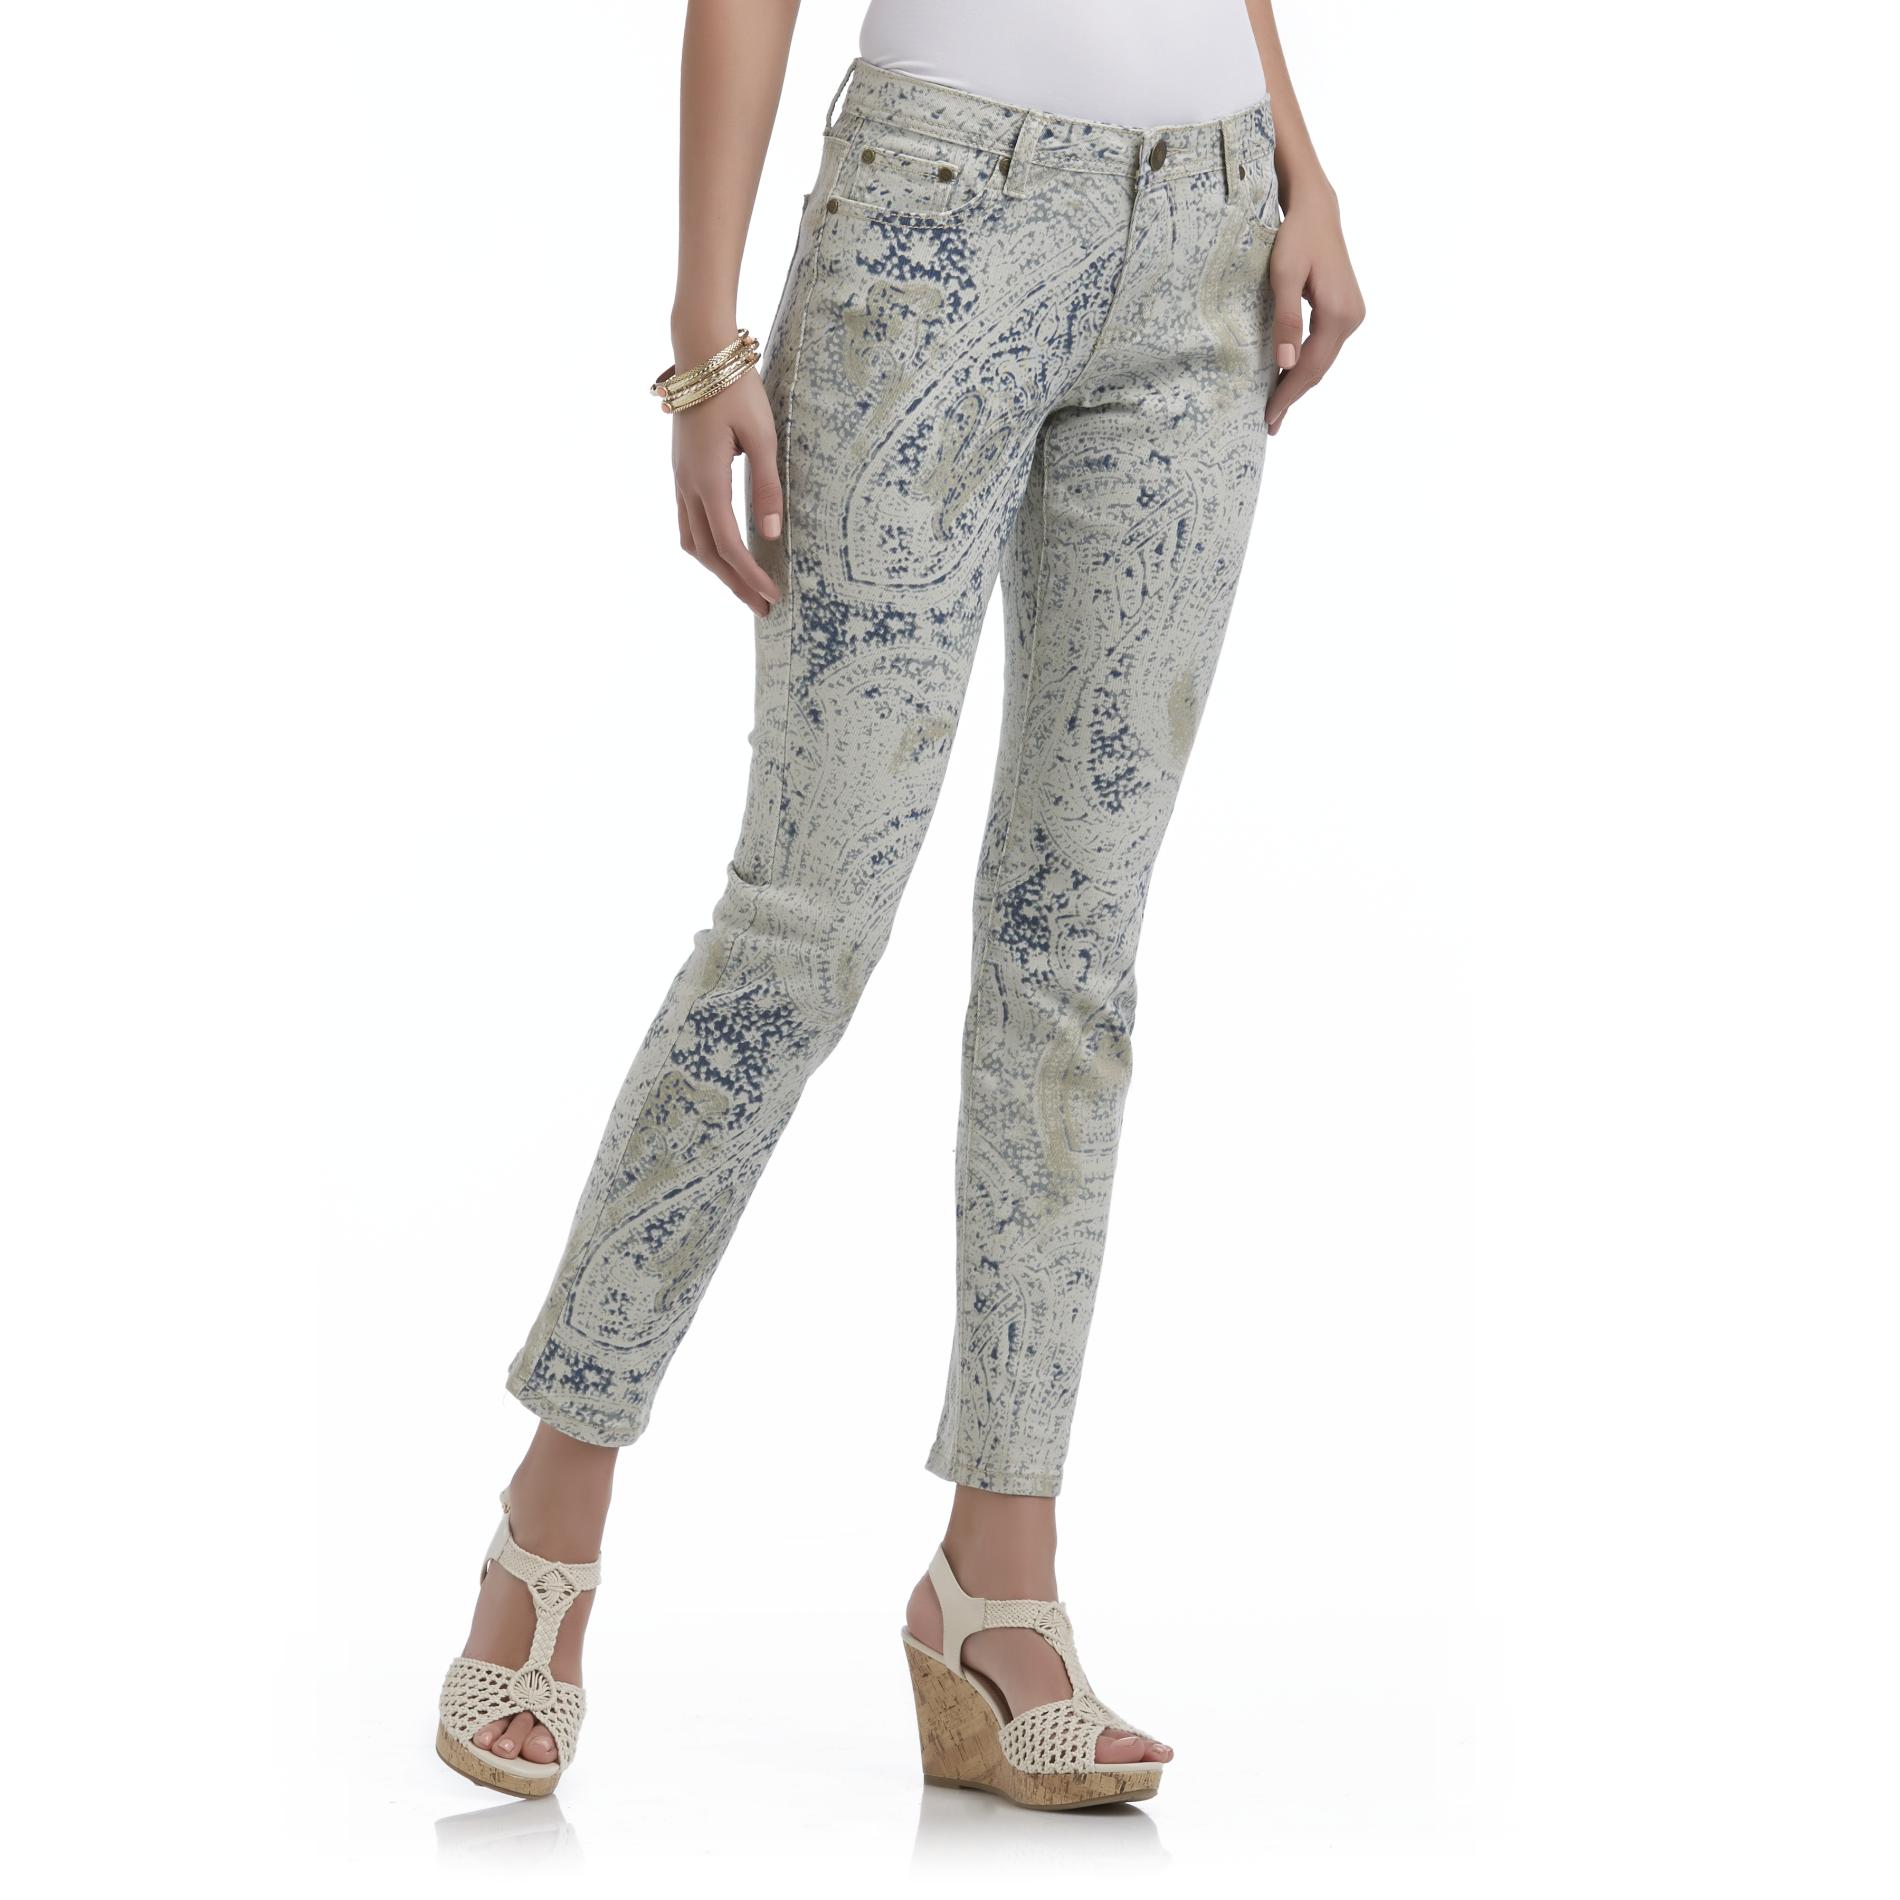 Canyon River Blues Women's Cuffed Ankle Jeans - Paisley